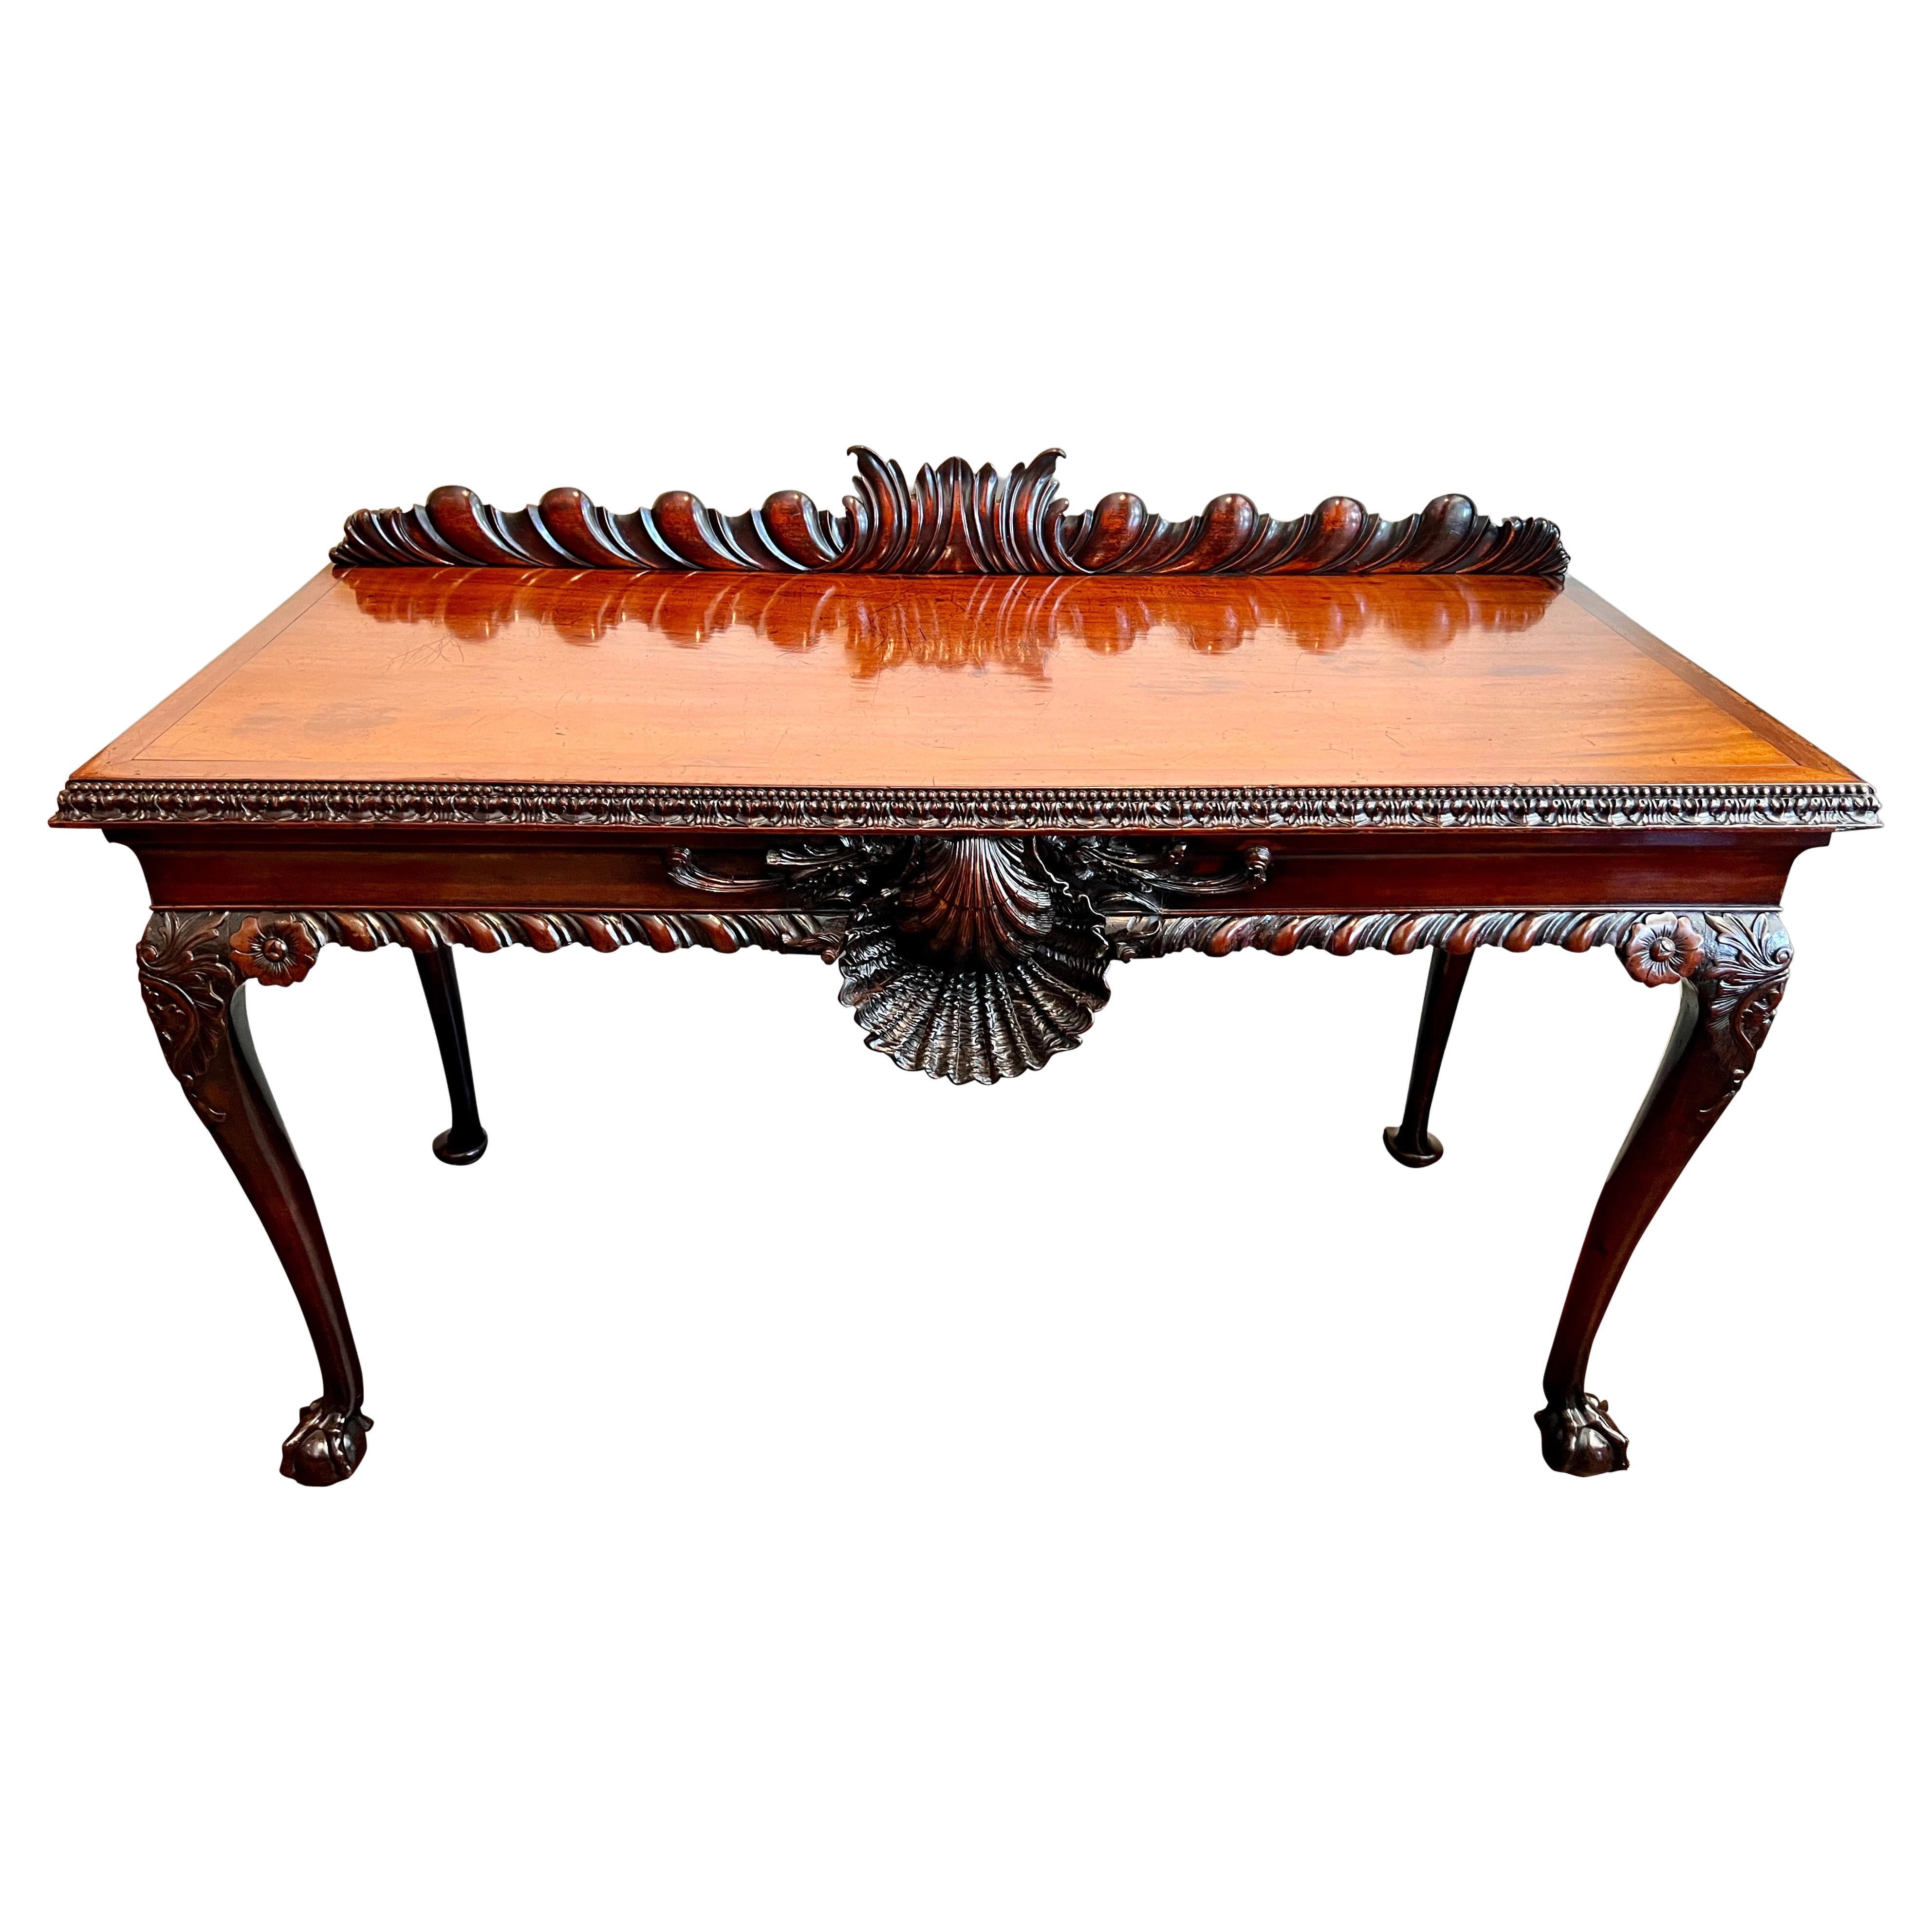 An extraordinary highly carved Irish mahogany serving table from the Chippendale period, the top surmounted with a fluted and carved backsplash, the front edge gadrooned, beaded and centered by a dynamic beautifully carved shell. The piece is